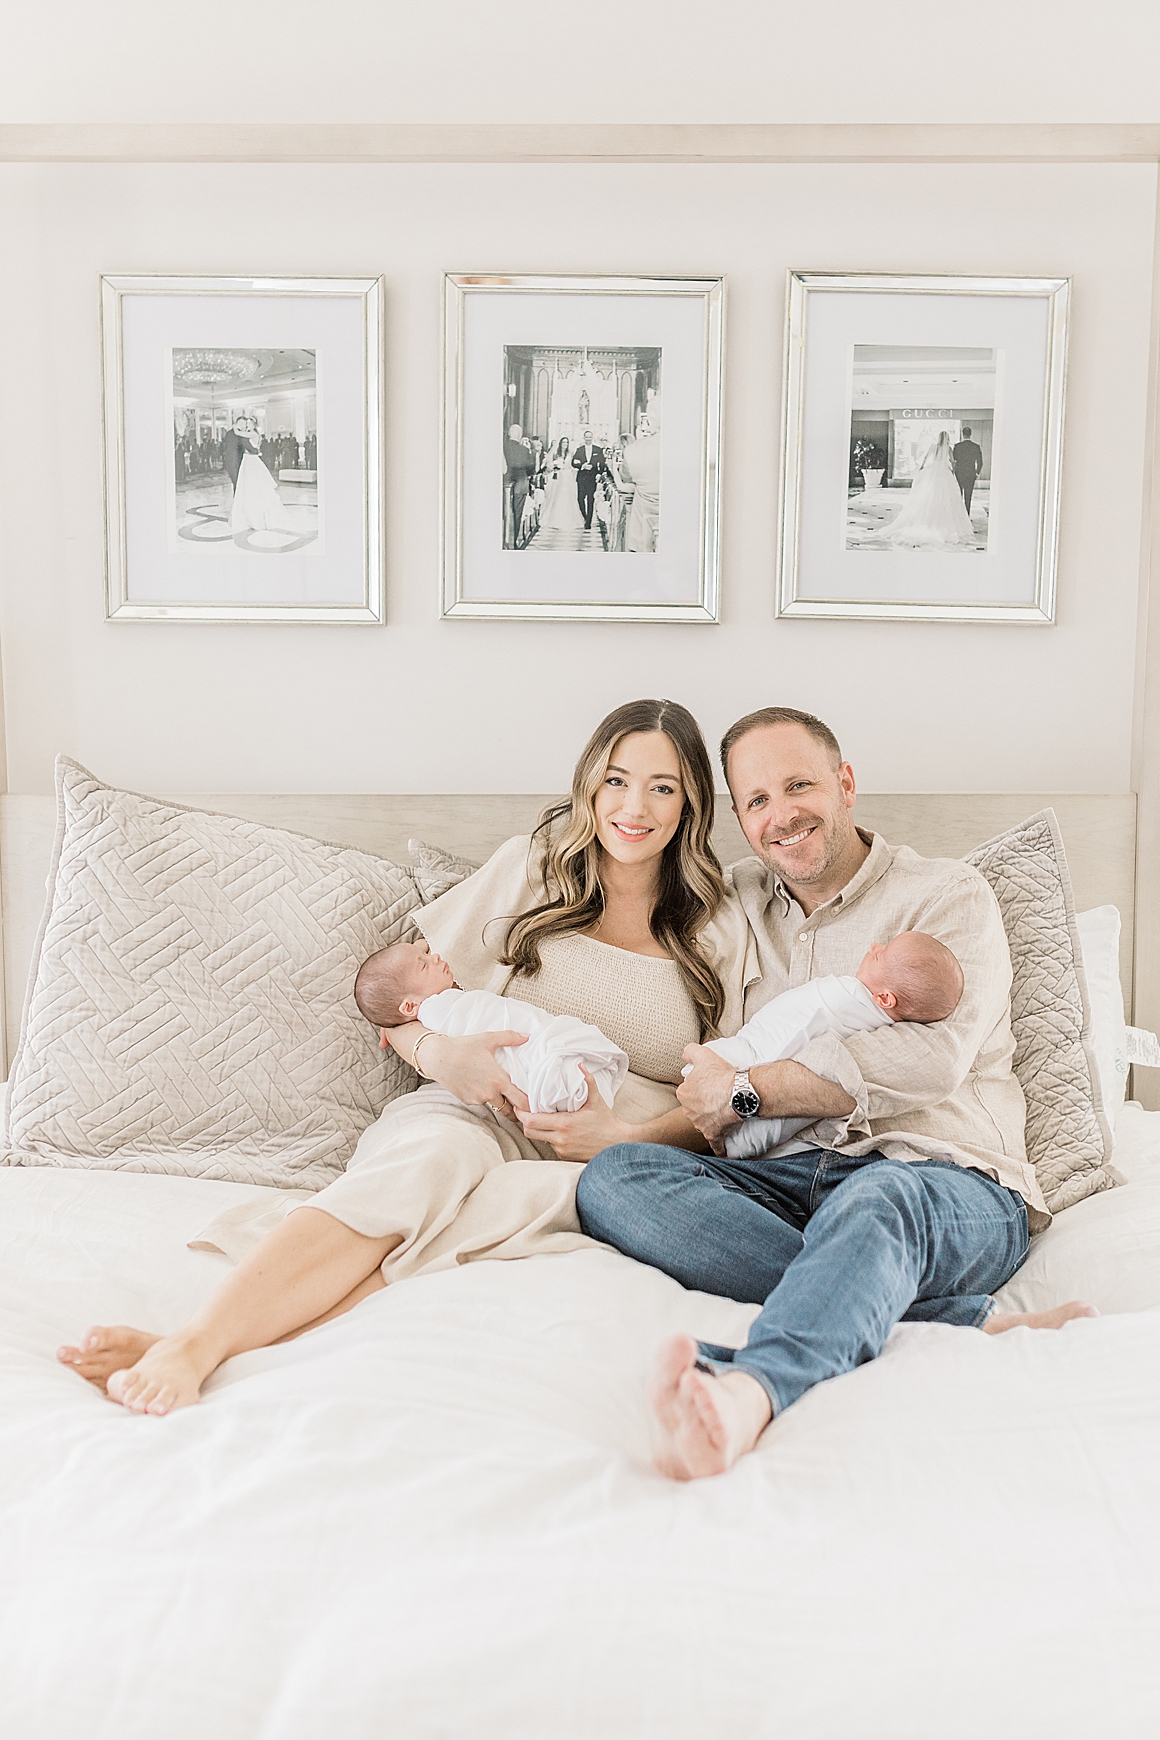 Lifestyle newborn photoshoot with twin boys in Charleston, SC. Photos by Caitlyn Motycka Photography.